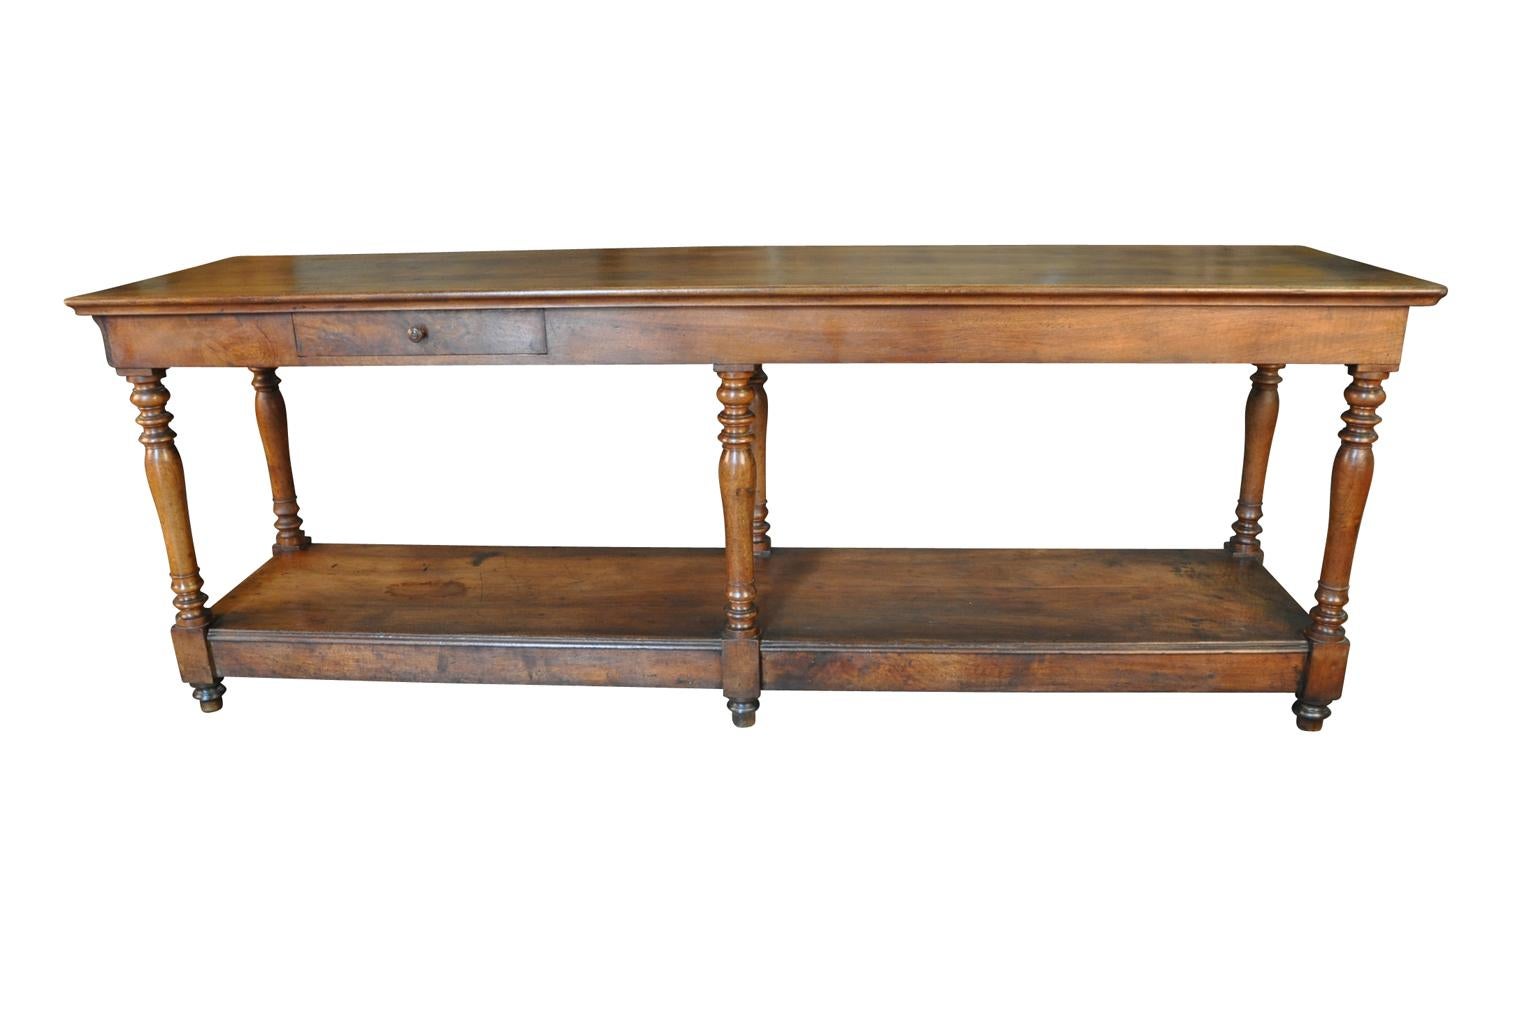 A very handsome Louis Philippe period Draper's table, console from the South of France. Beautifully constructed from walnut with a lovely patina. Perfect as a console or sofa table.